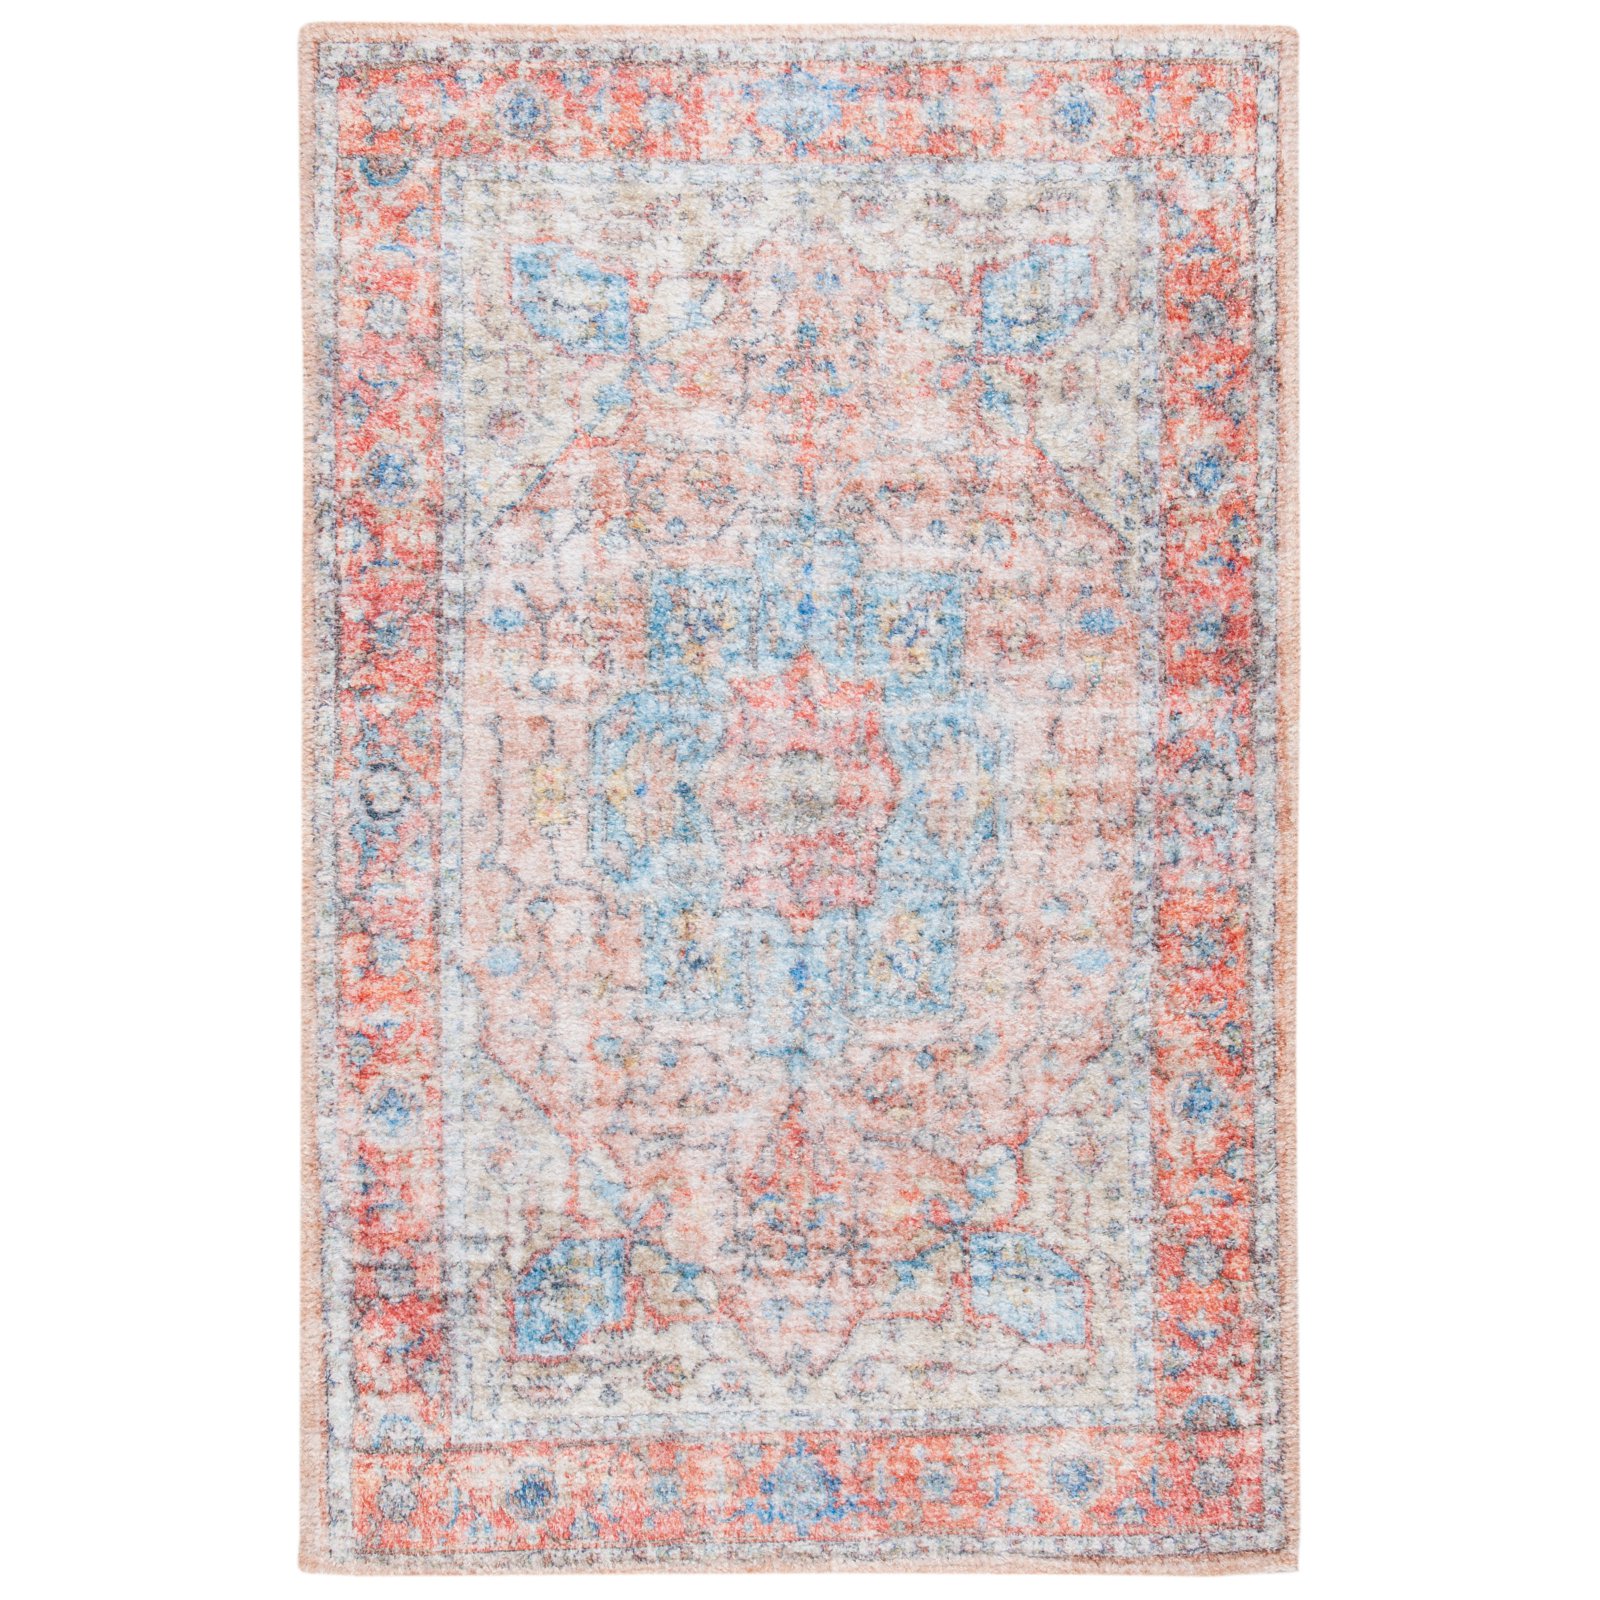 ALAZA Shabby Chic Vintage Floral Area Rug Rugs Mat for Living Room Bedroom 6'x4' 